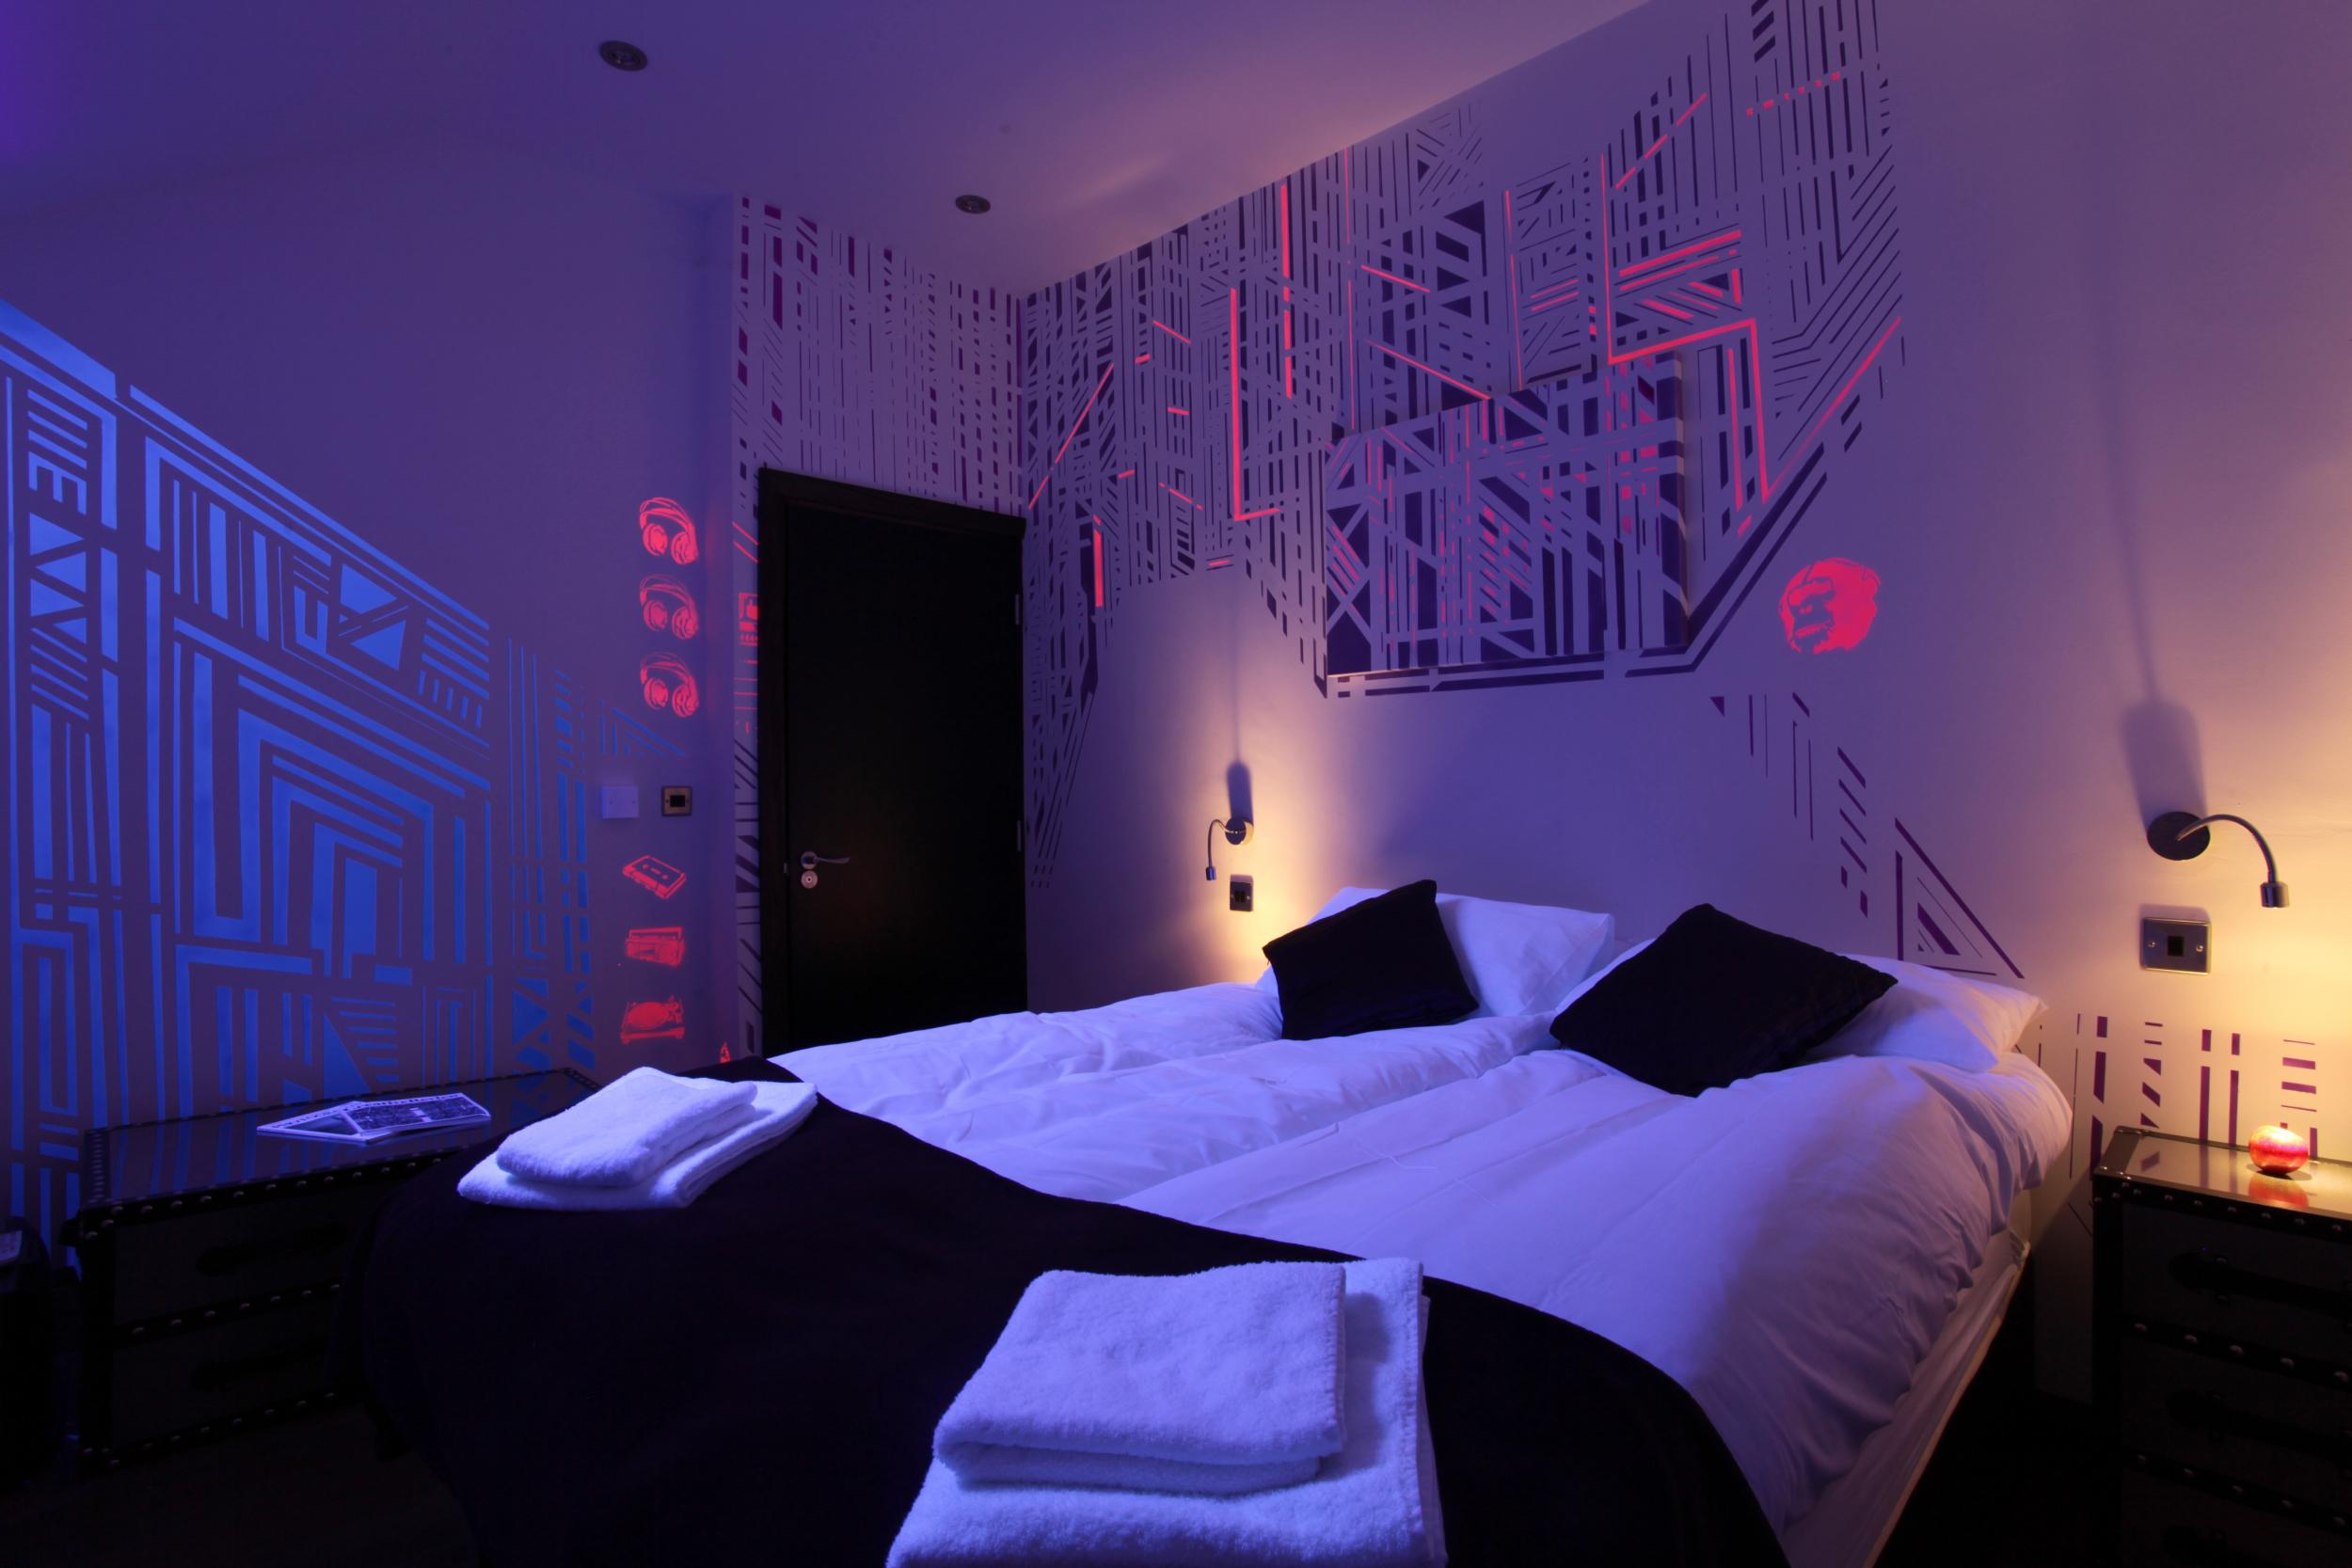 The Fort York Boutique Hostel rooms have UV lighting